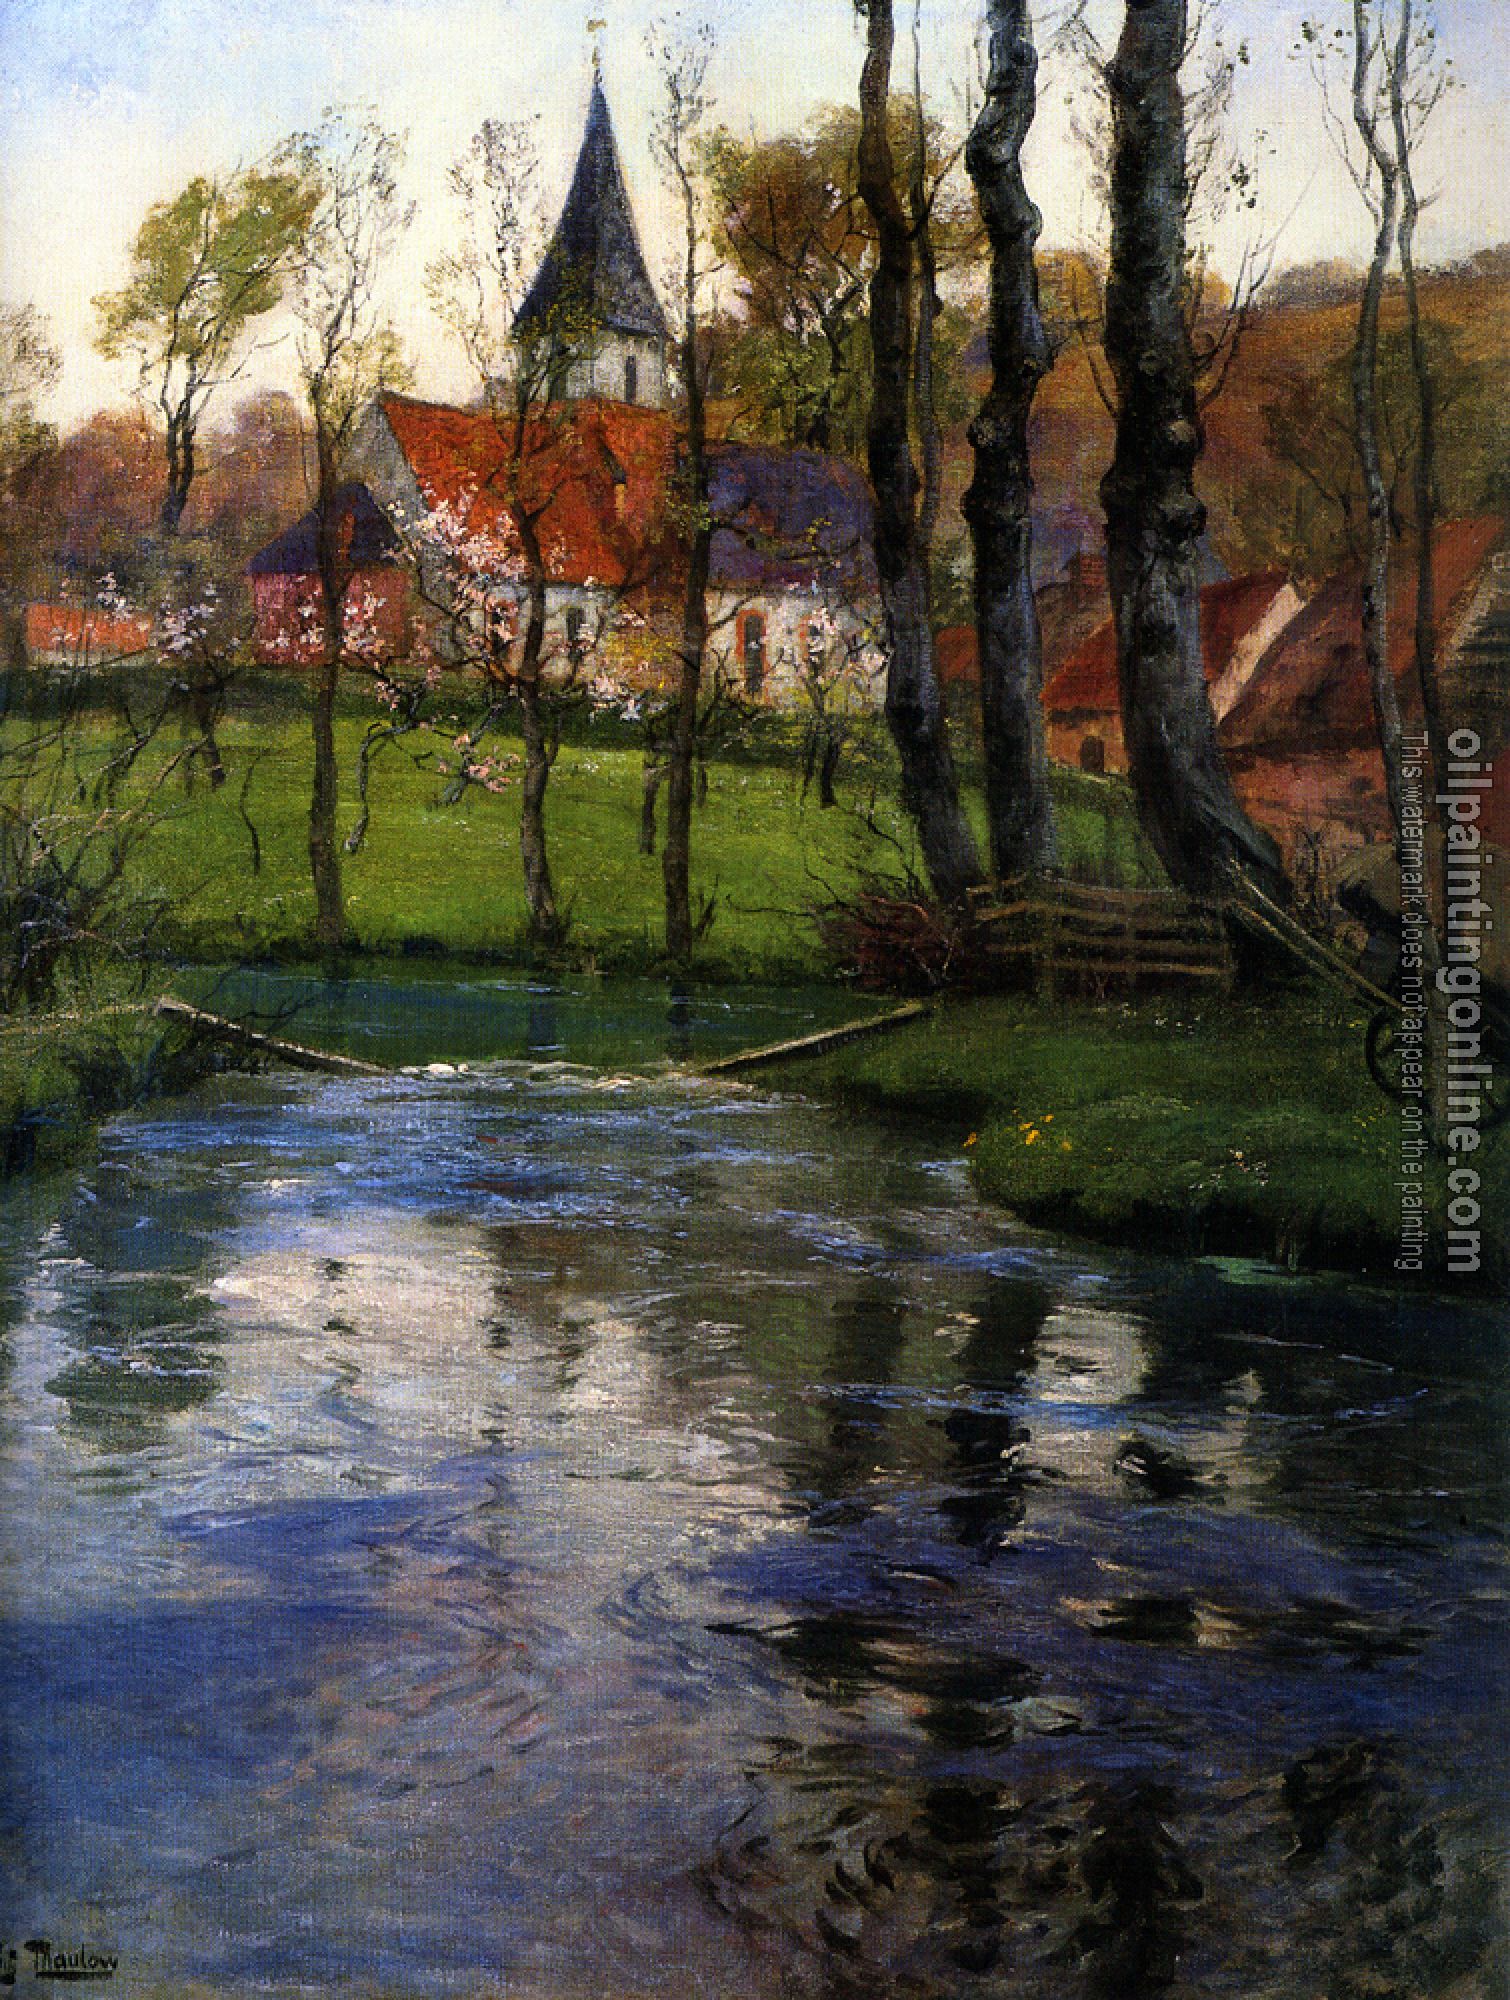 Thaulow, Frits - The Old Church by the River